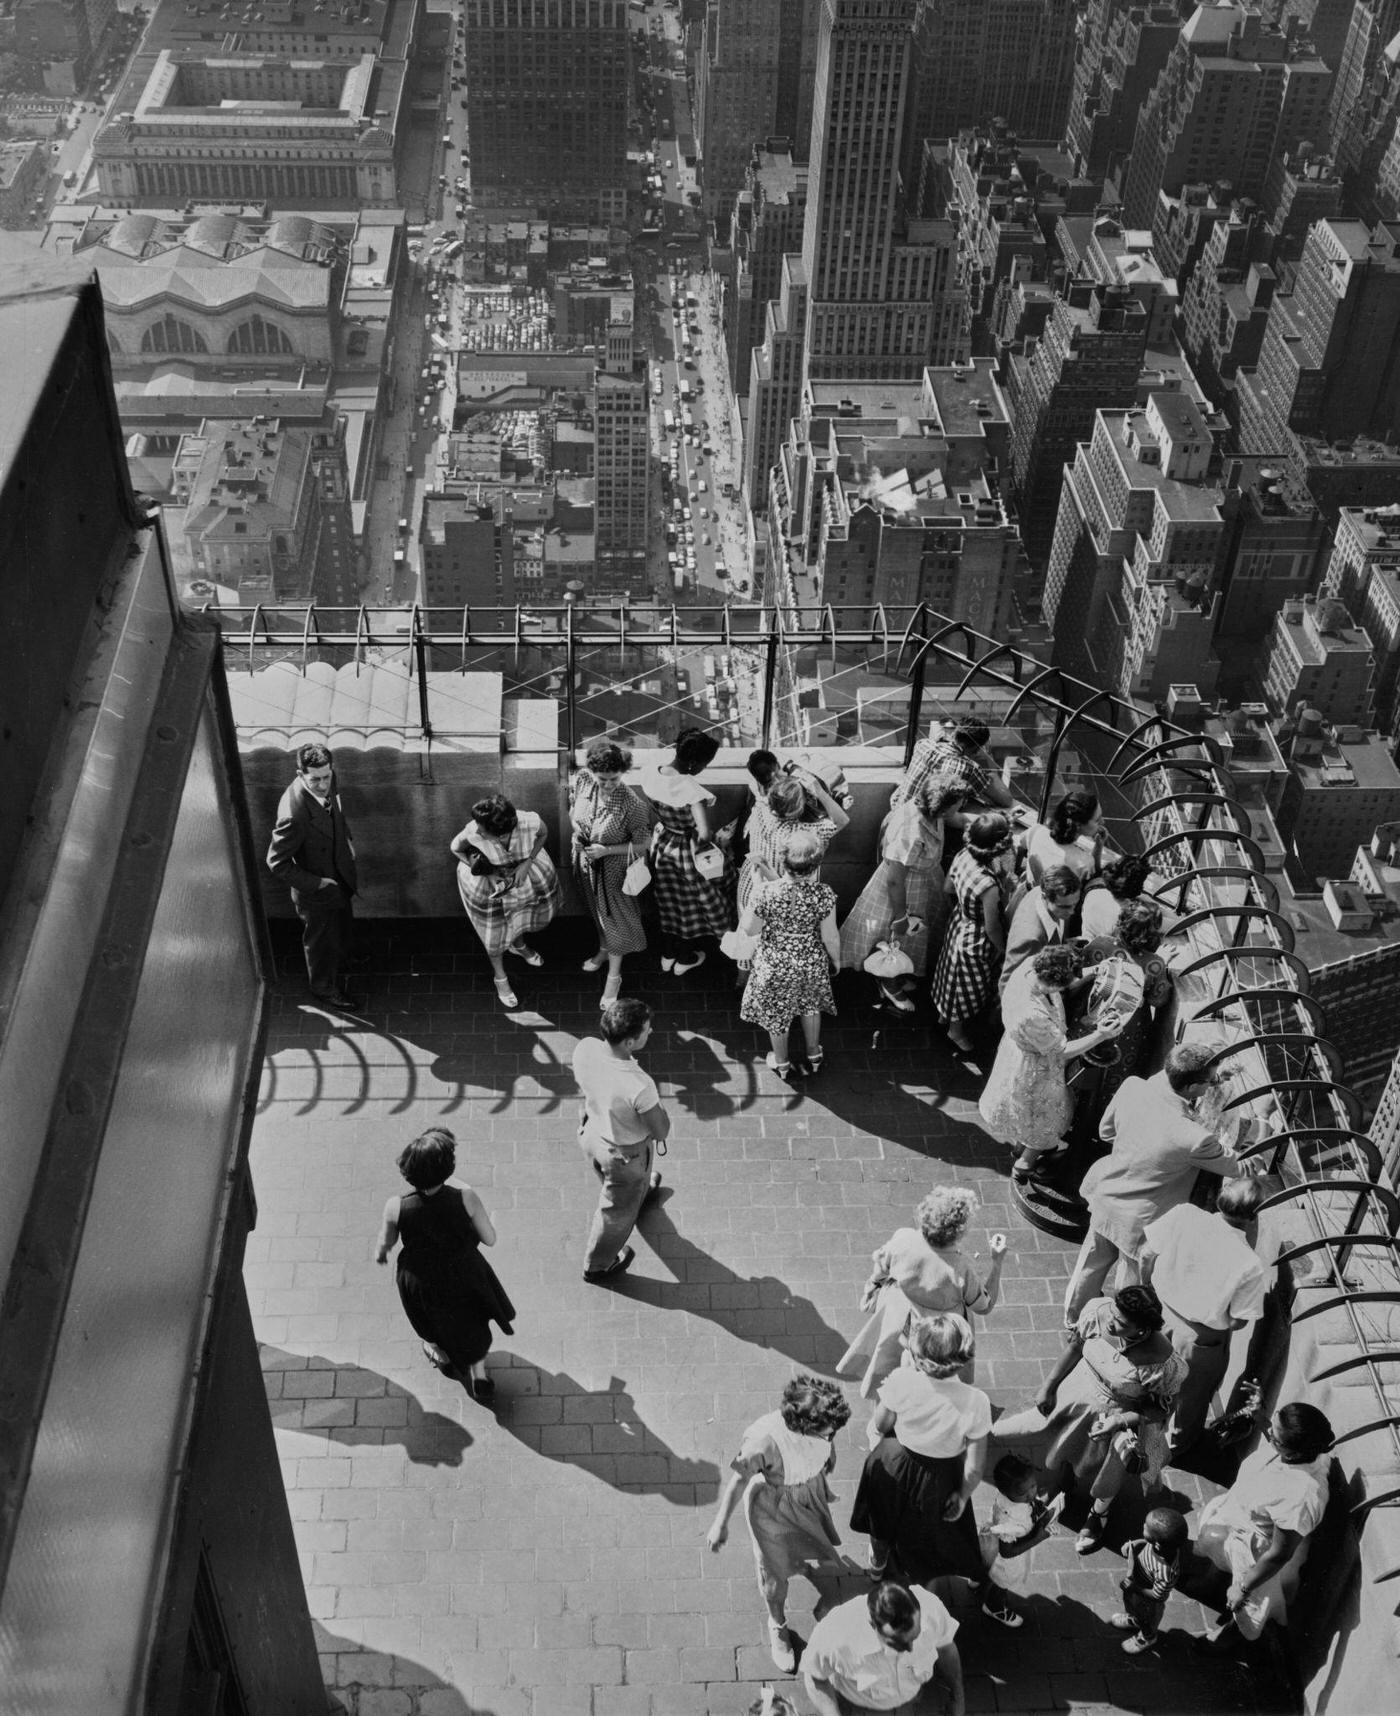 Empire State Building Observatory: Crowd Of People With City And East River Below, Manhattan, 1953